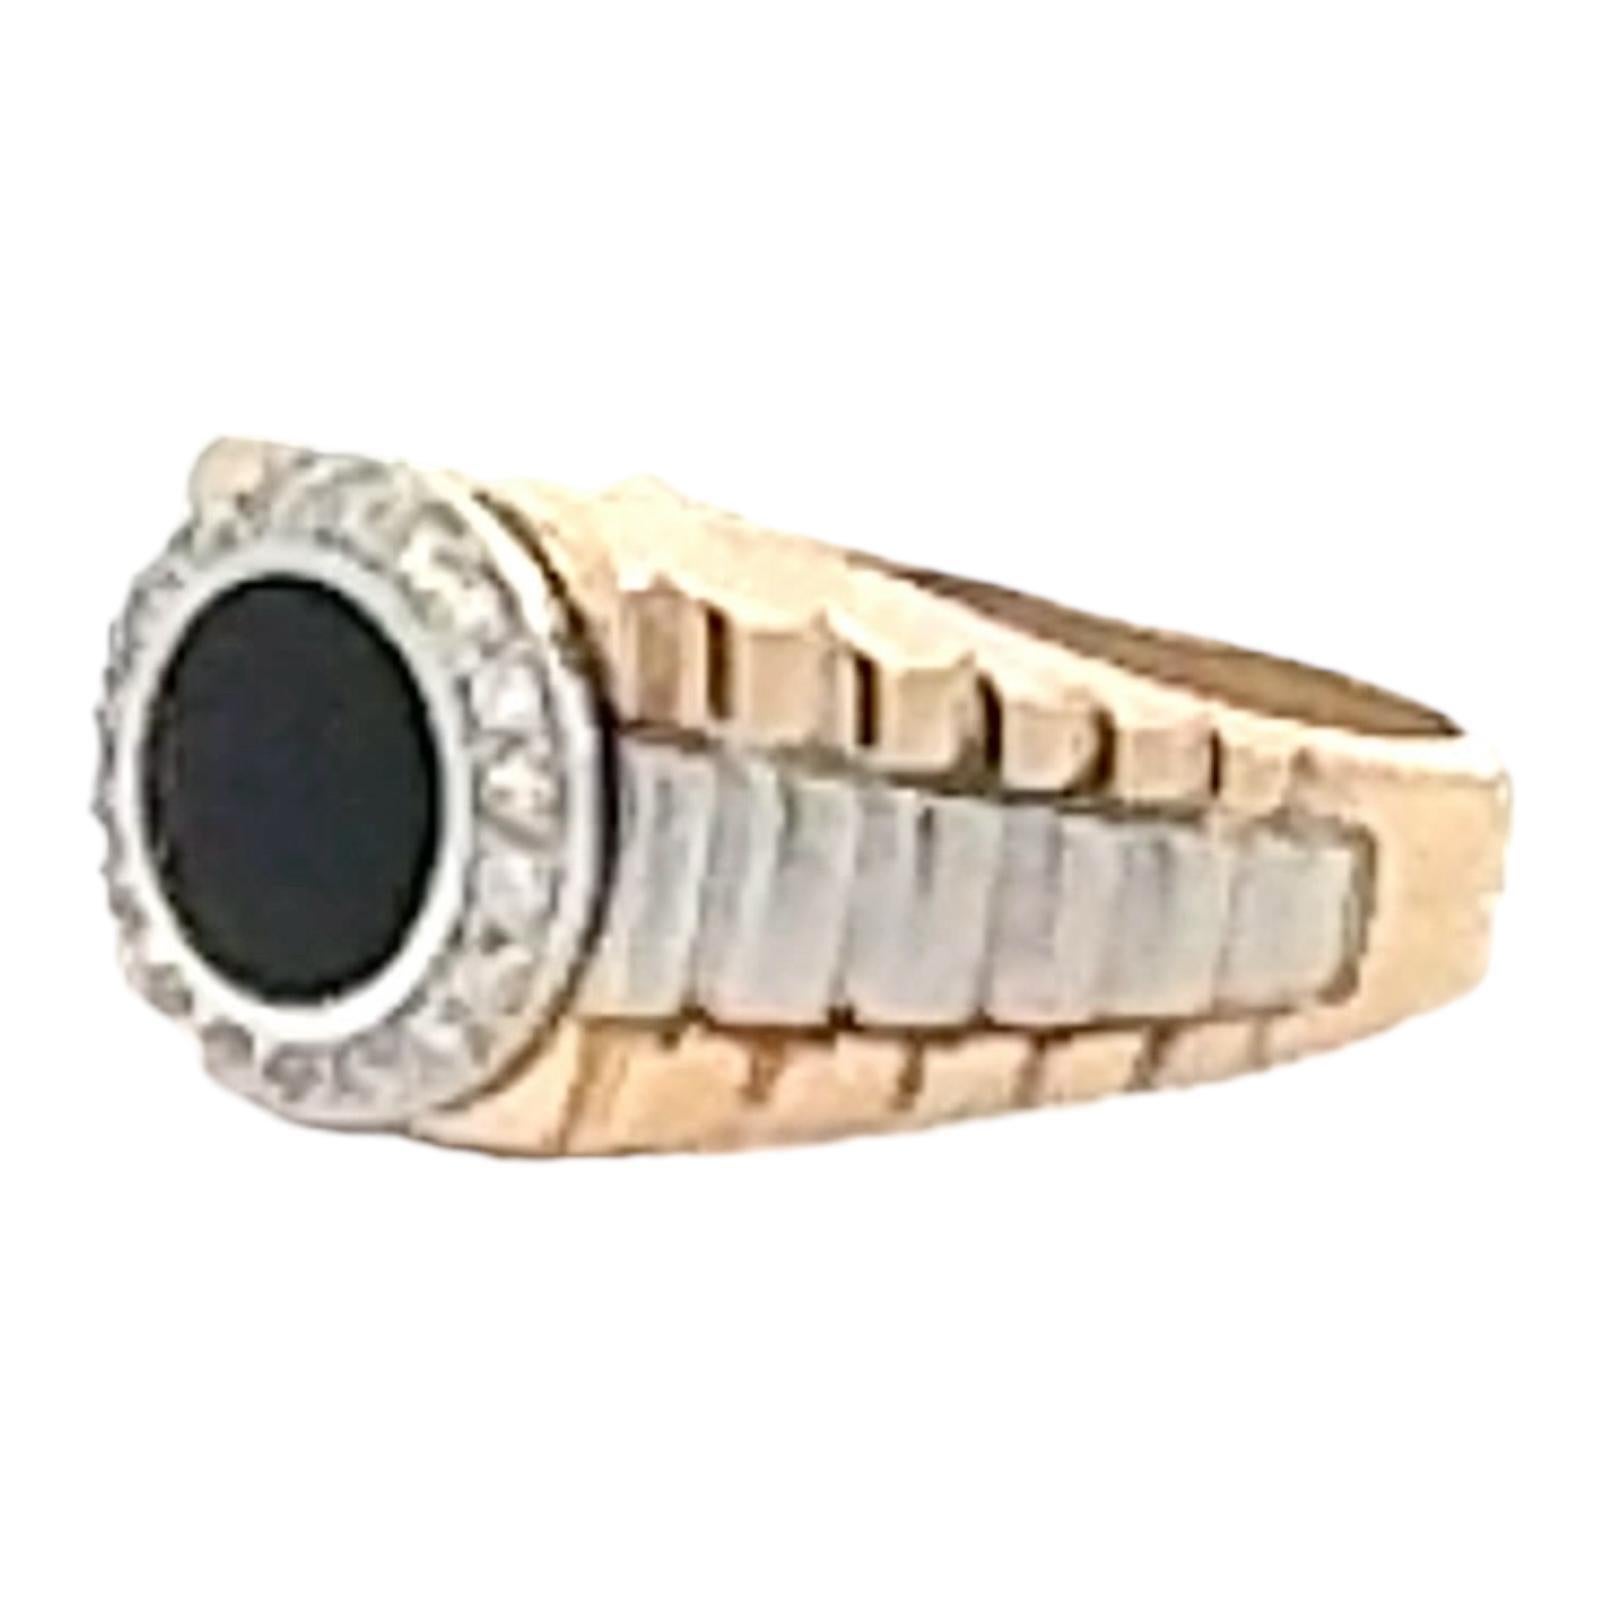 Gent's Rolex Style ring crafted in 14 karat yellow & white gold. The ring features a cabochon black onyx gemstone and round brilliant cut diamonds weighing approximately .25 carat total weight and graded I color and SI clarity. The ring measures .50